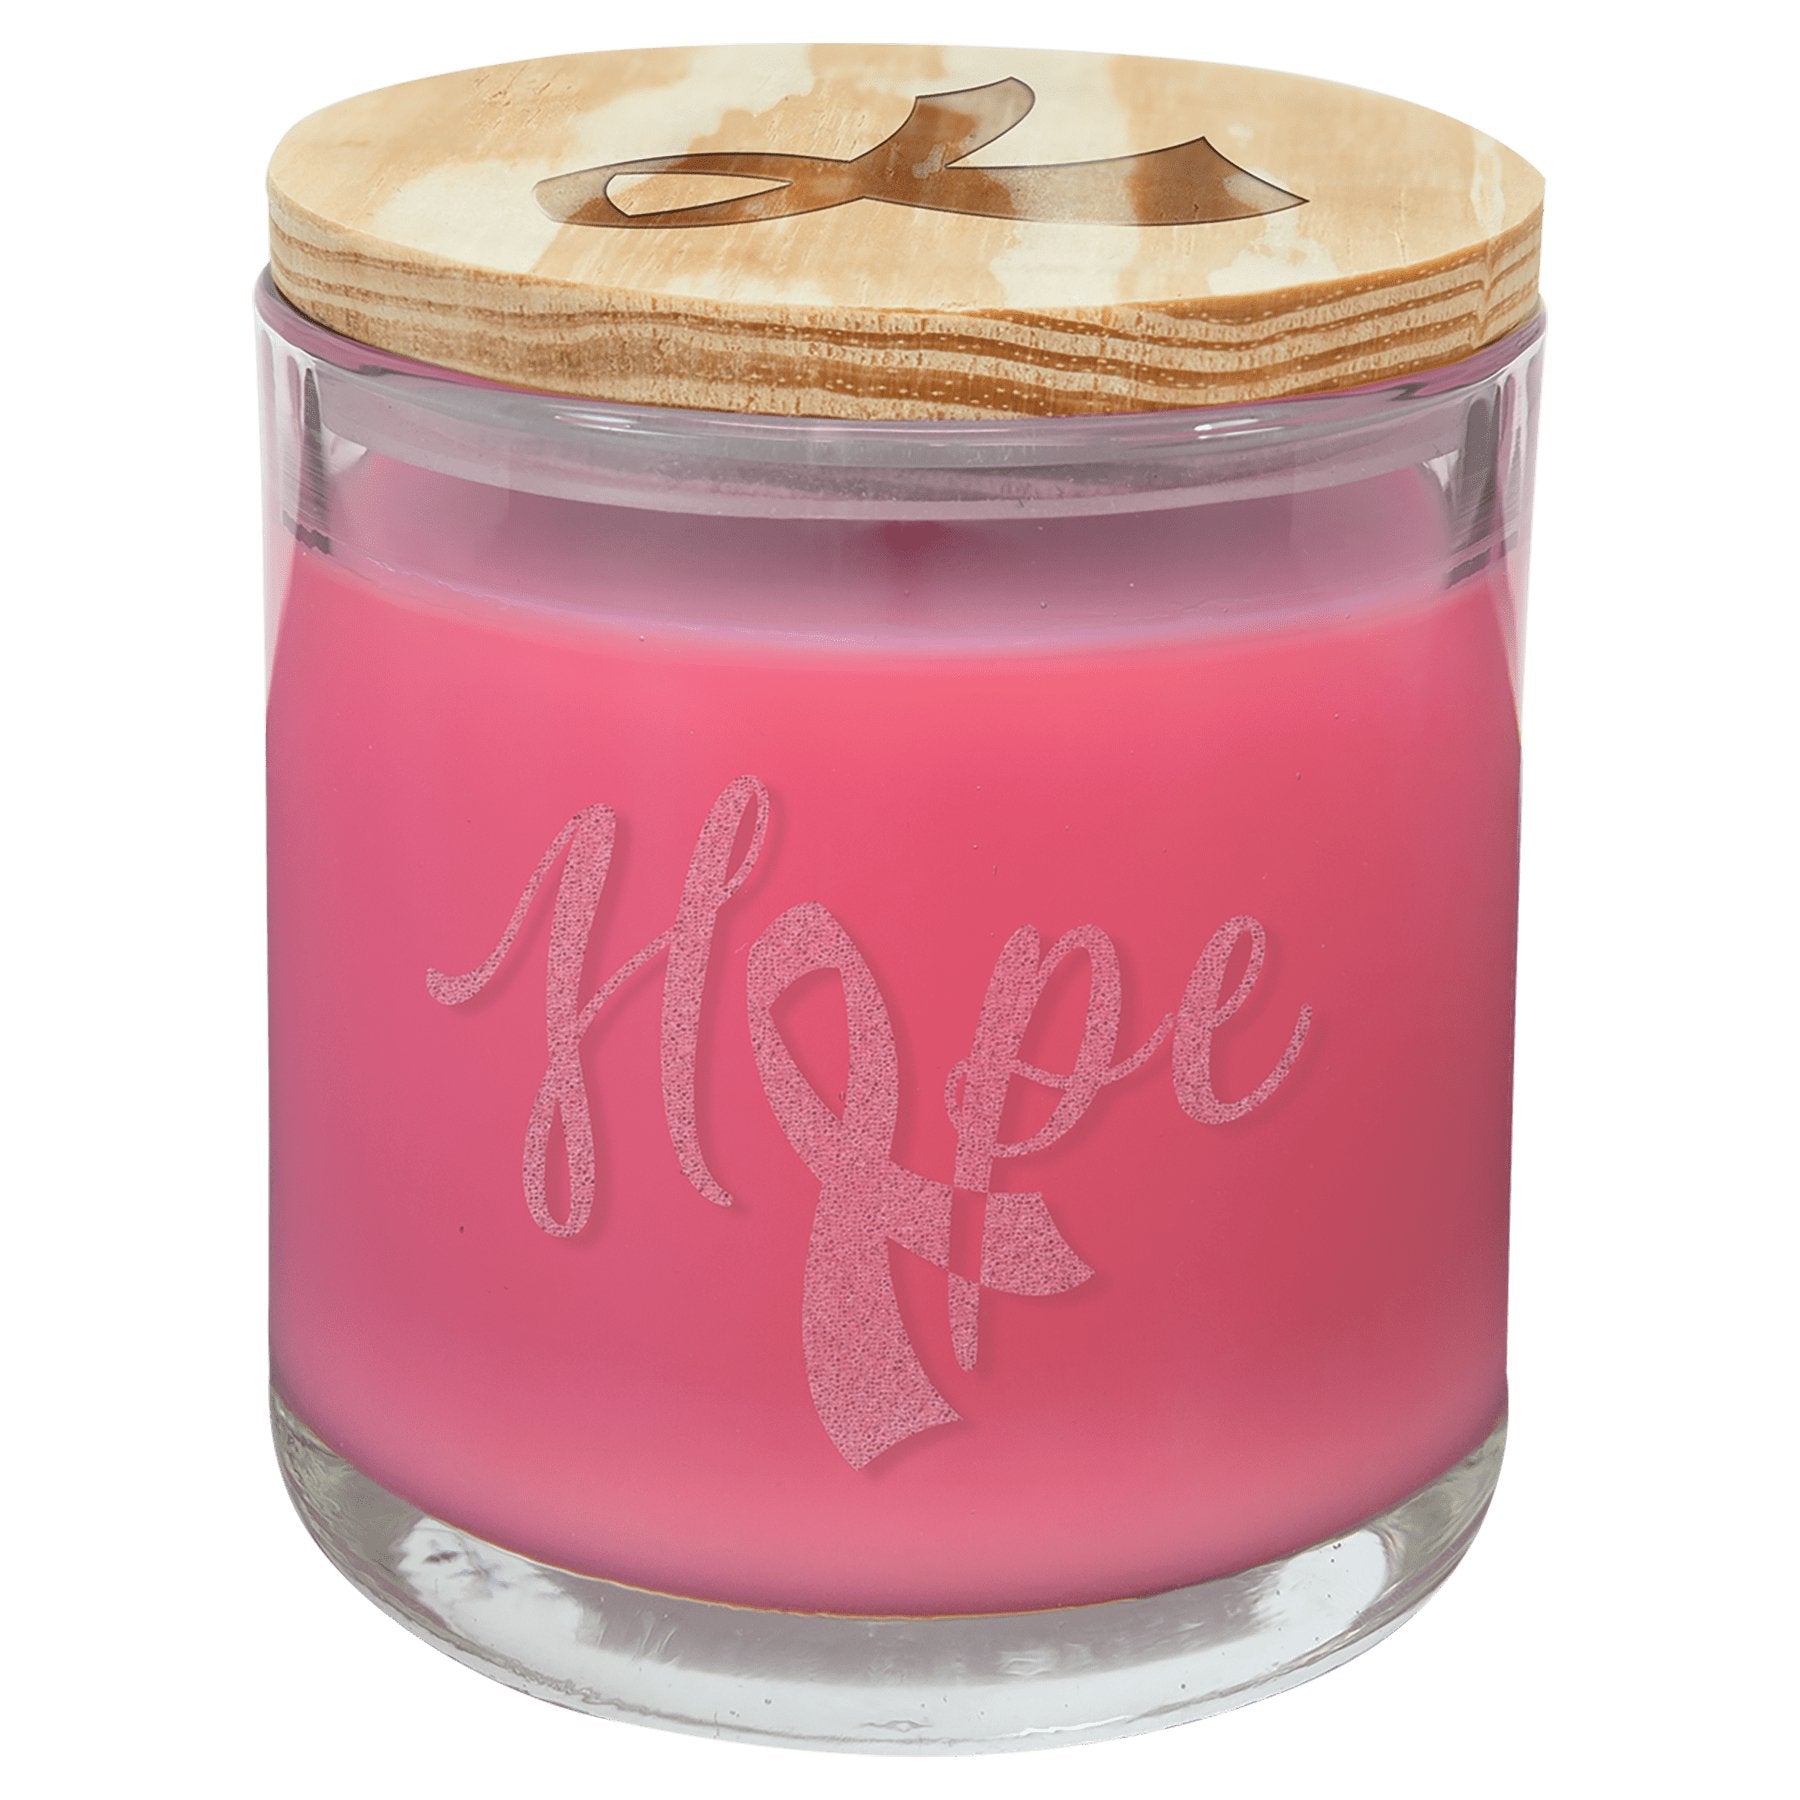 14 oz. Candle in a Glass Holder with Wood Lid - Everlasting Etchings, LLC